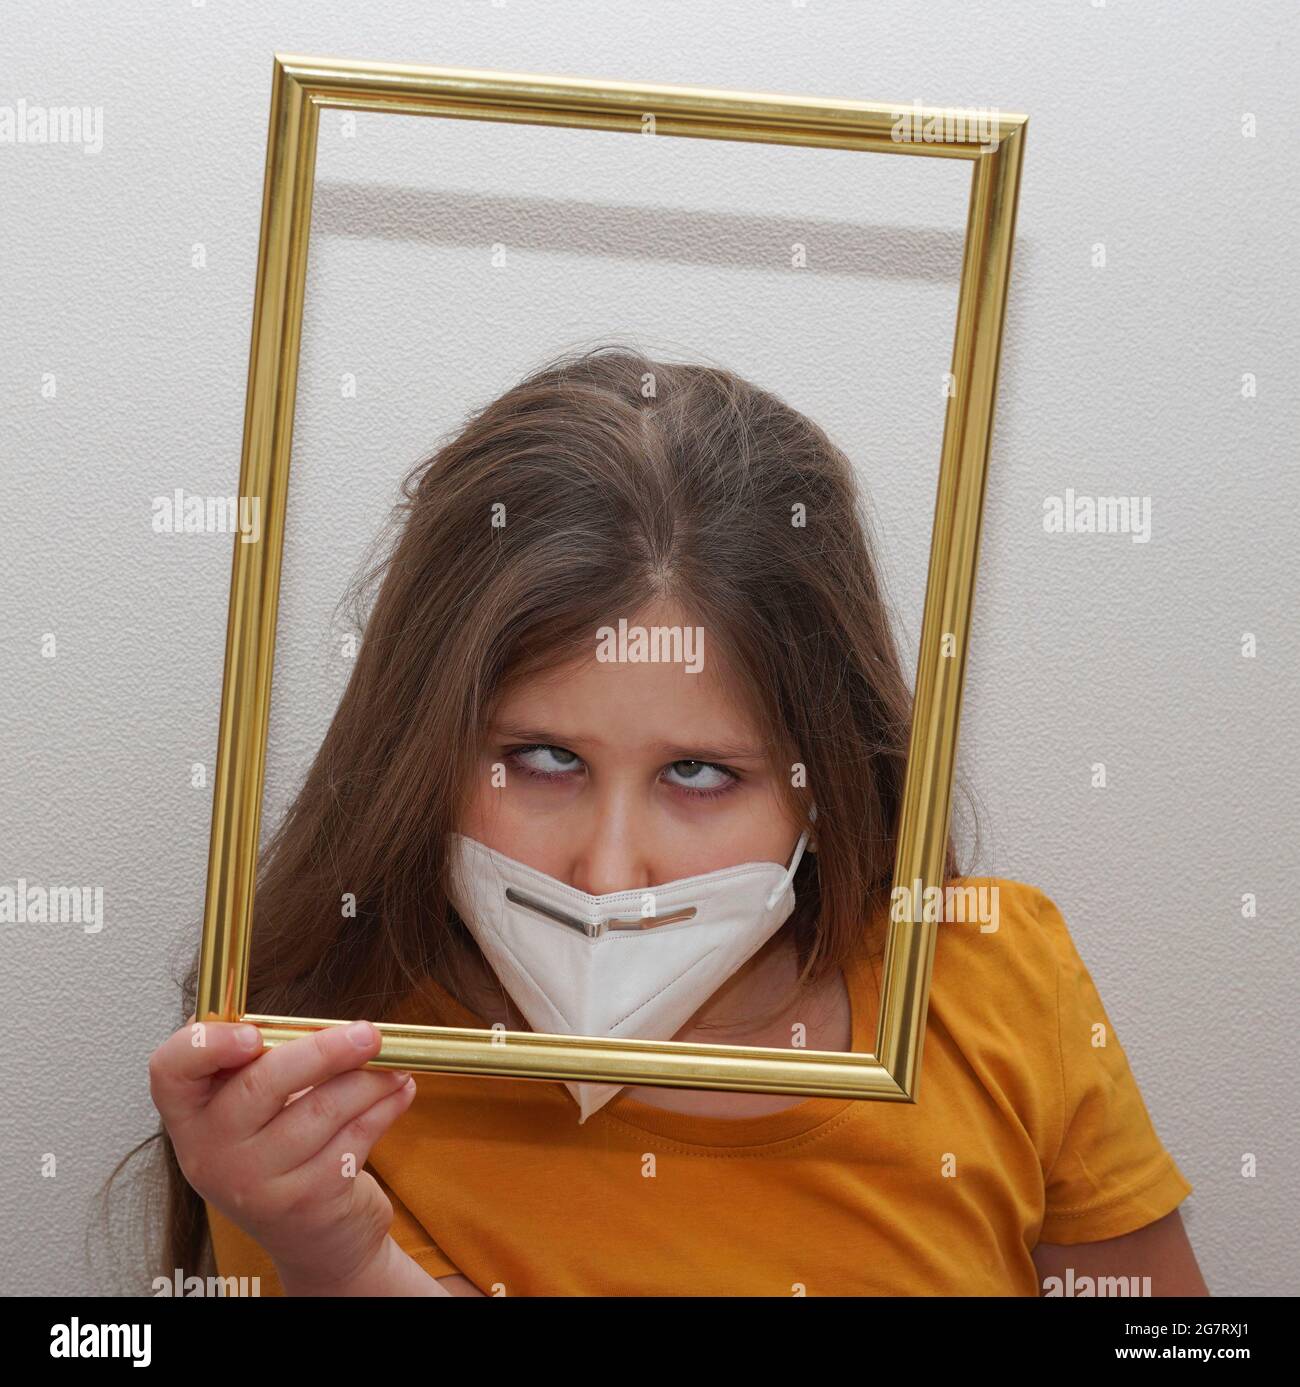 Cross-eyed girl in medical face mask and photo frame. Tired of quarantine and isolation. Protection against coronavirus and other viruses. Stock Photo